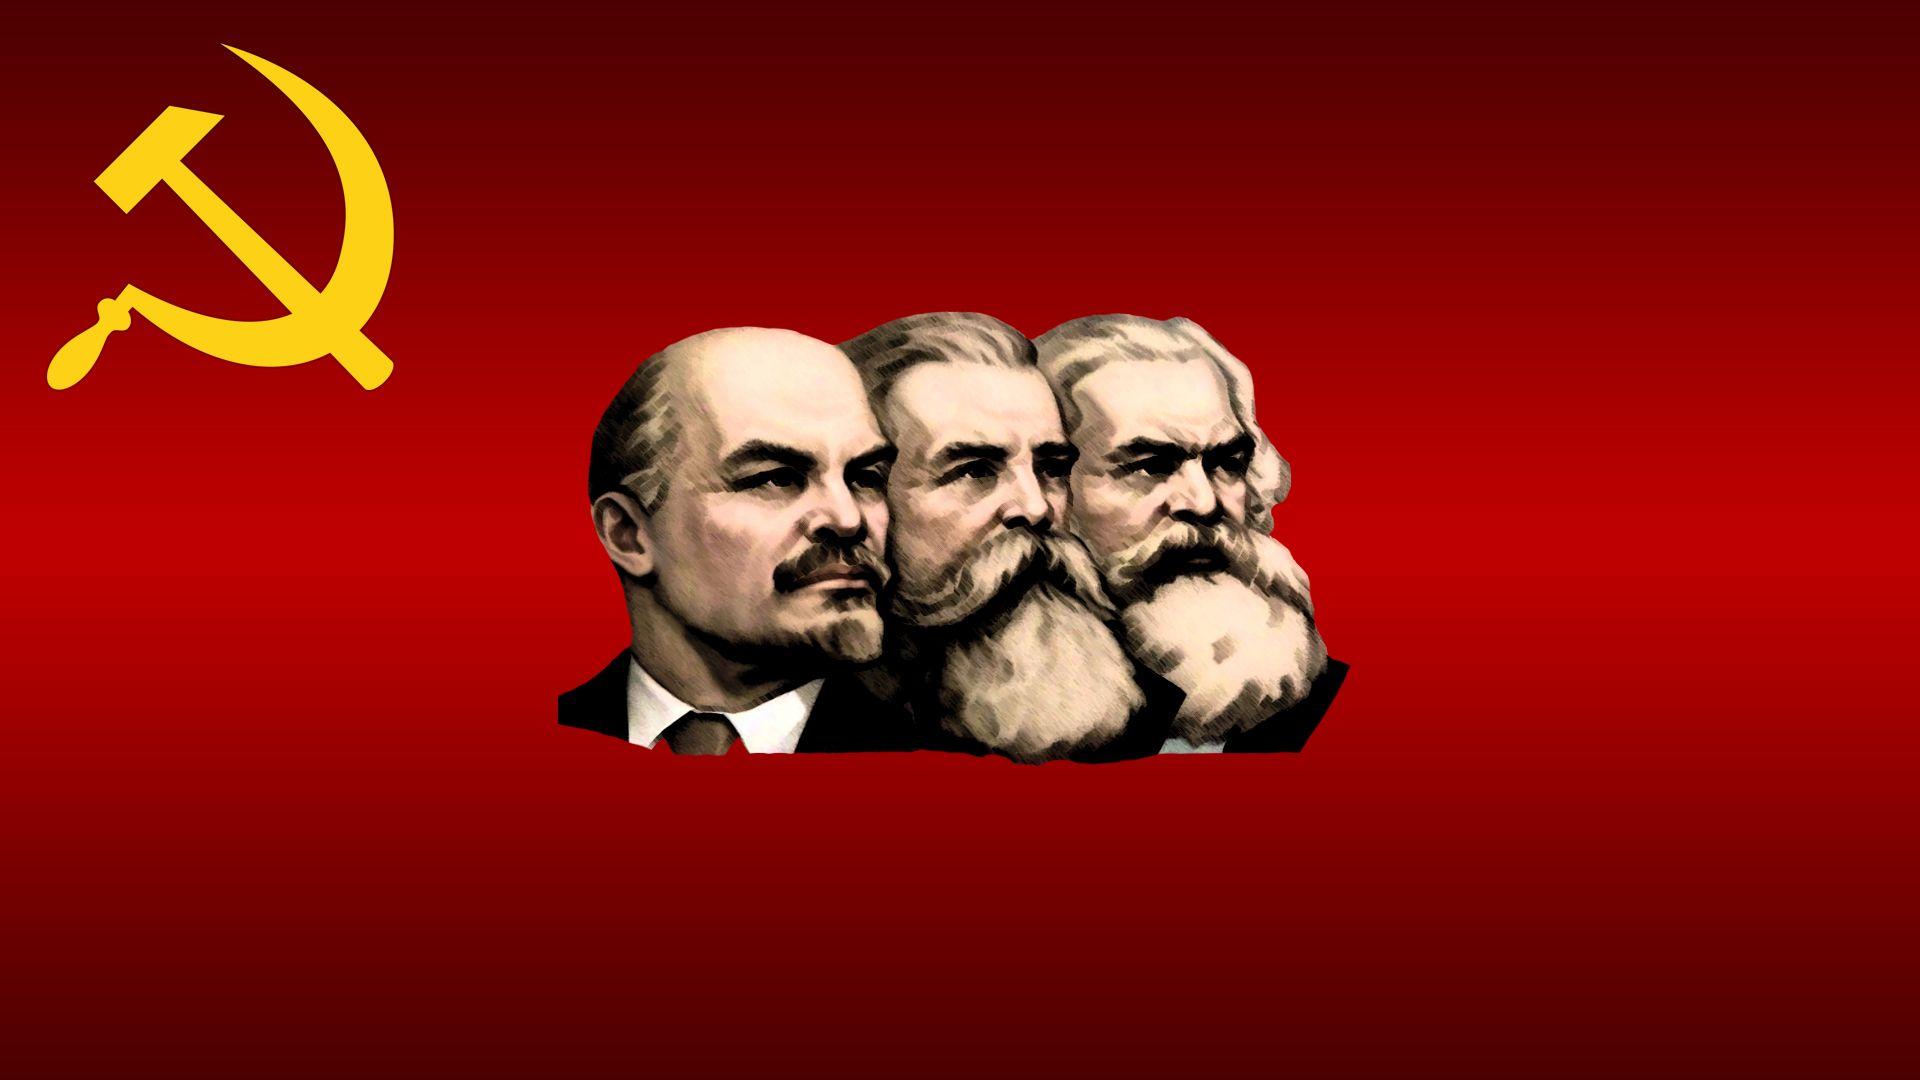 Fathers of Communism [1920x1080]